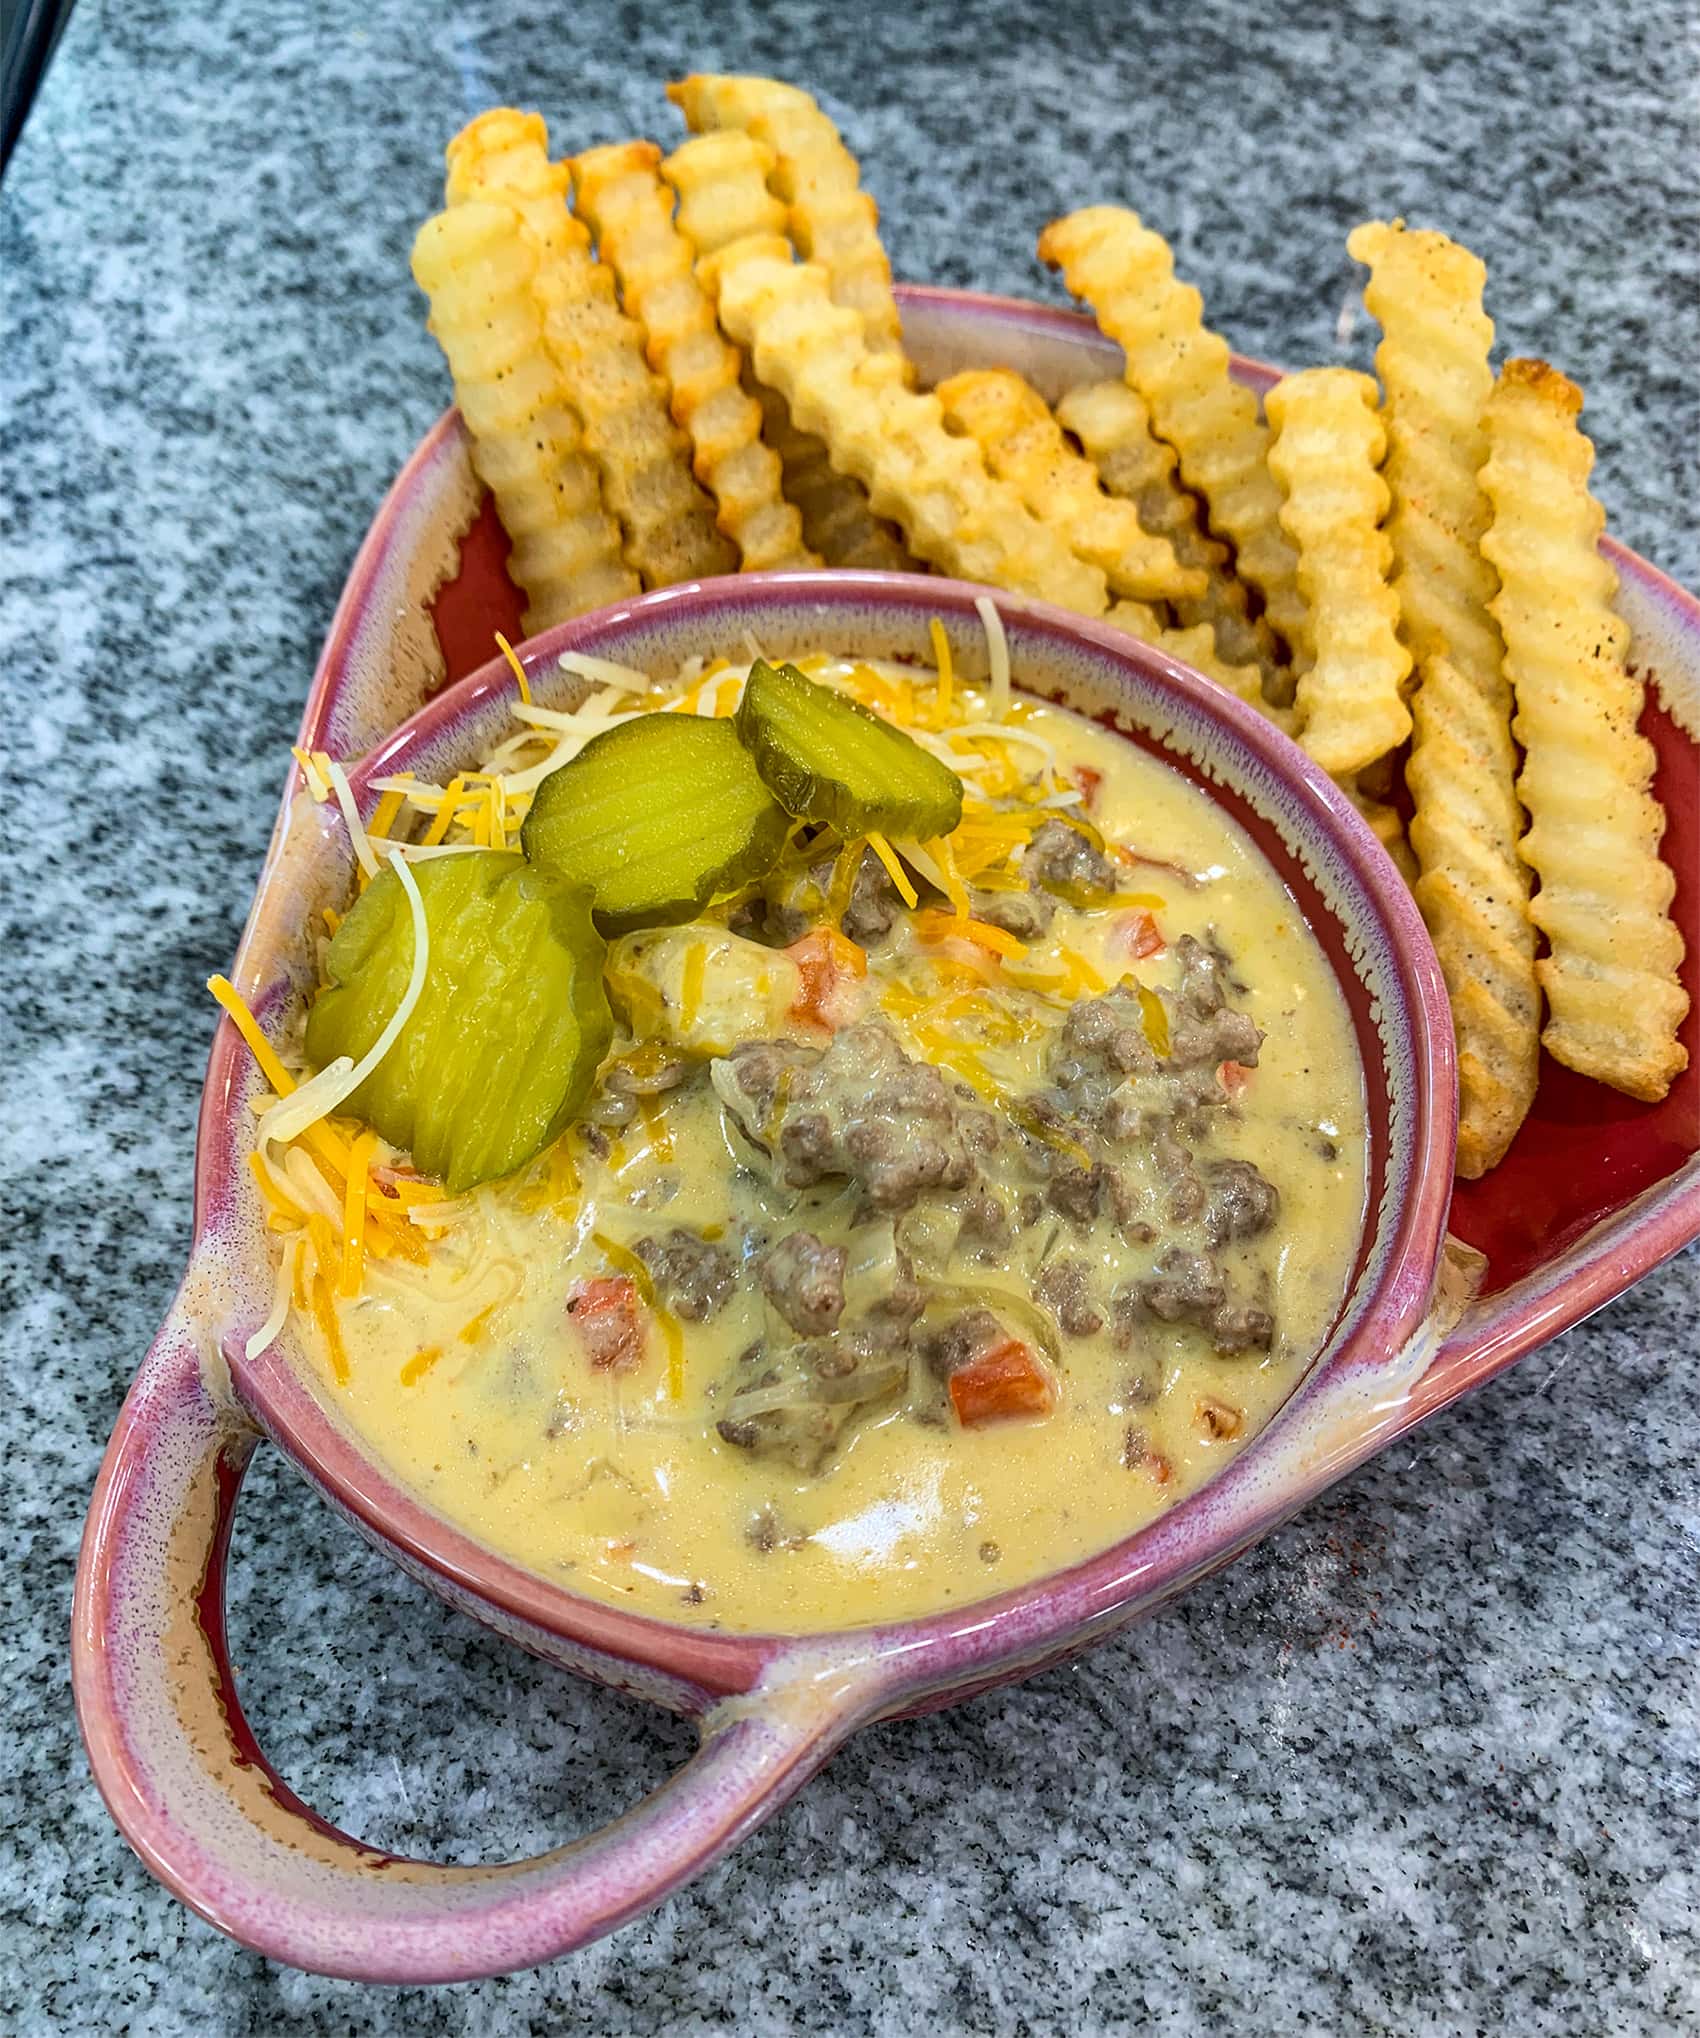 black & white countertop with a plate and bowl. plate has crinkle cut french fries. bowl shows creamy cheesy soup with ground beef and pickles on top.